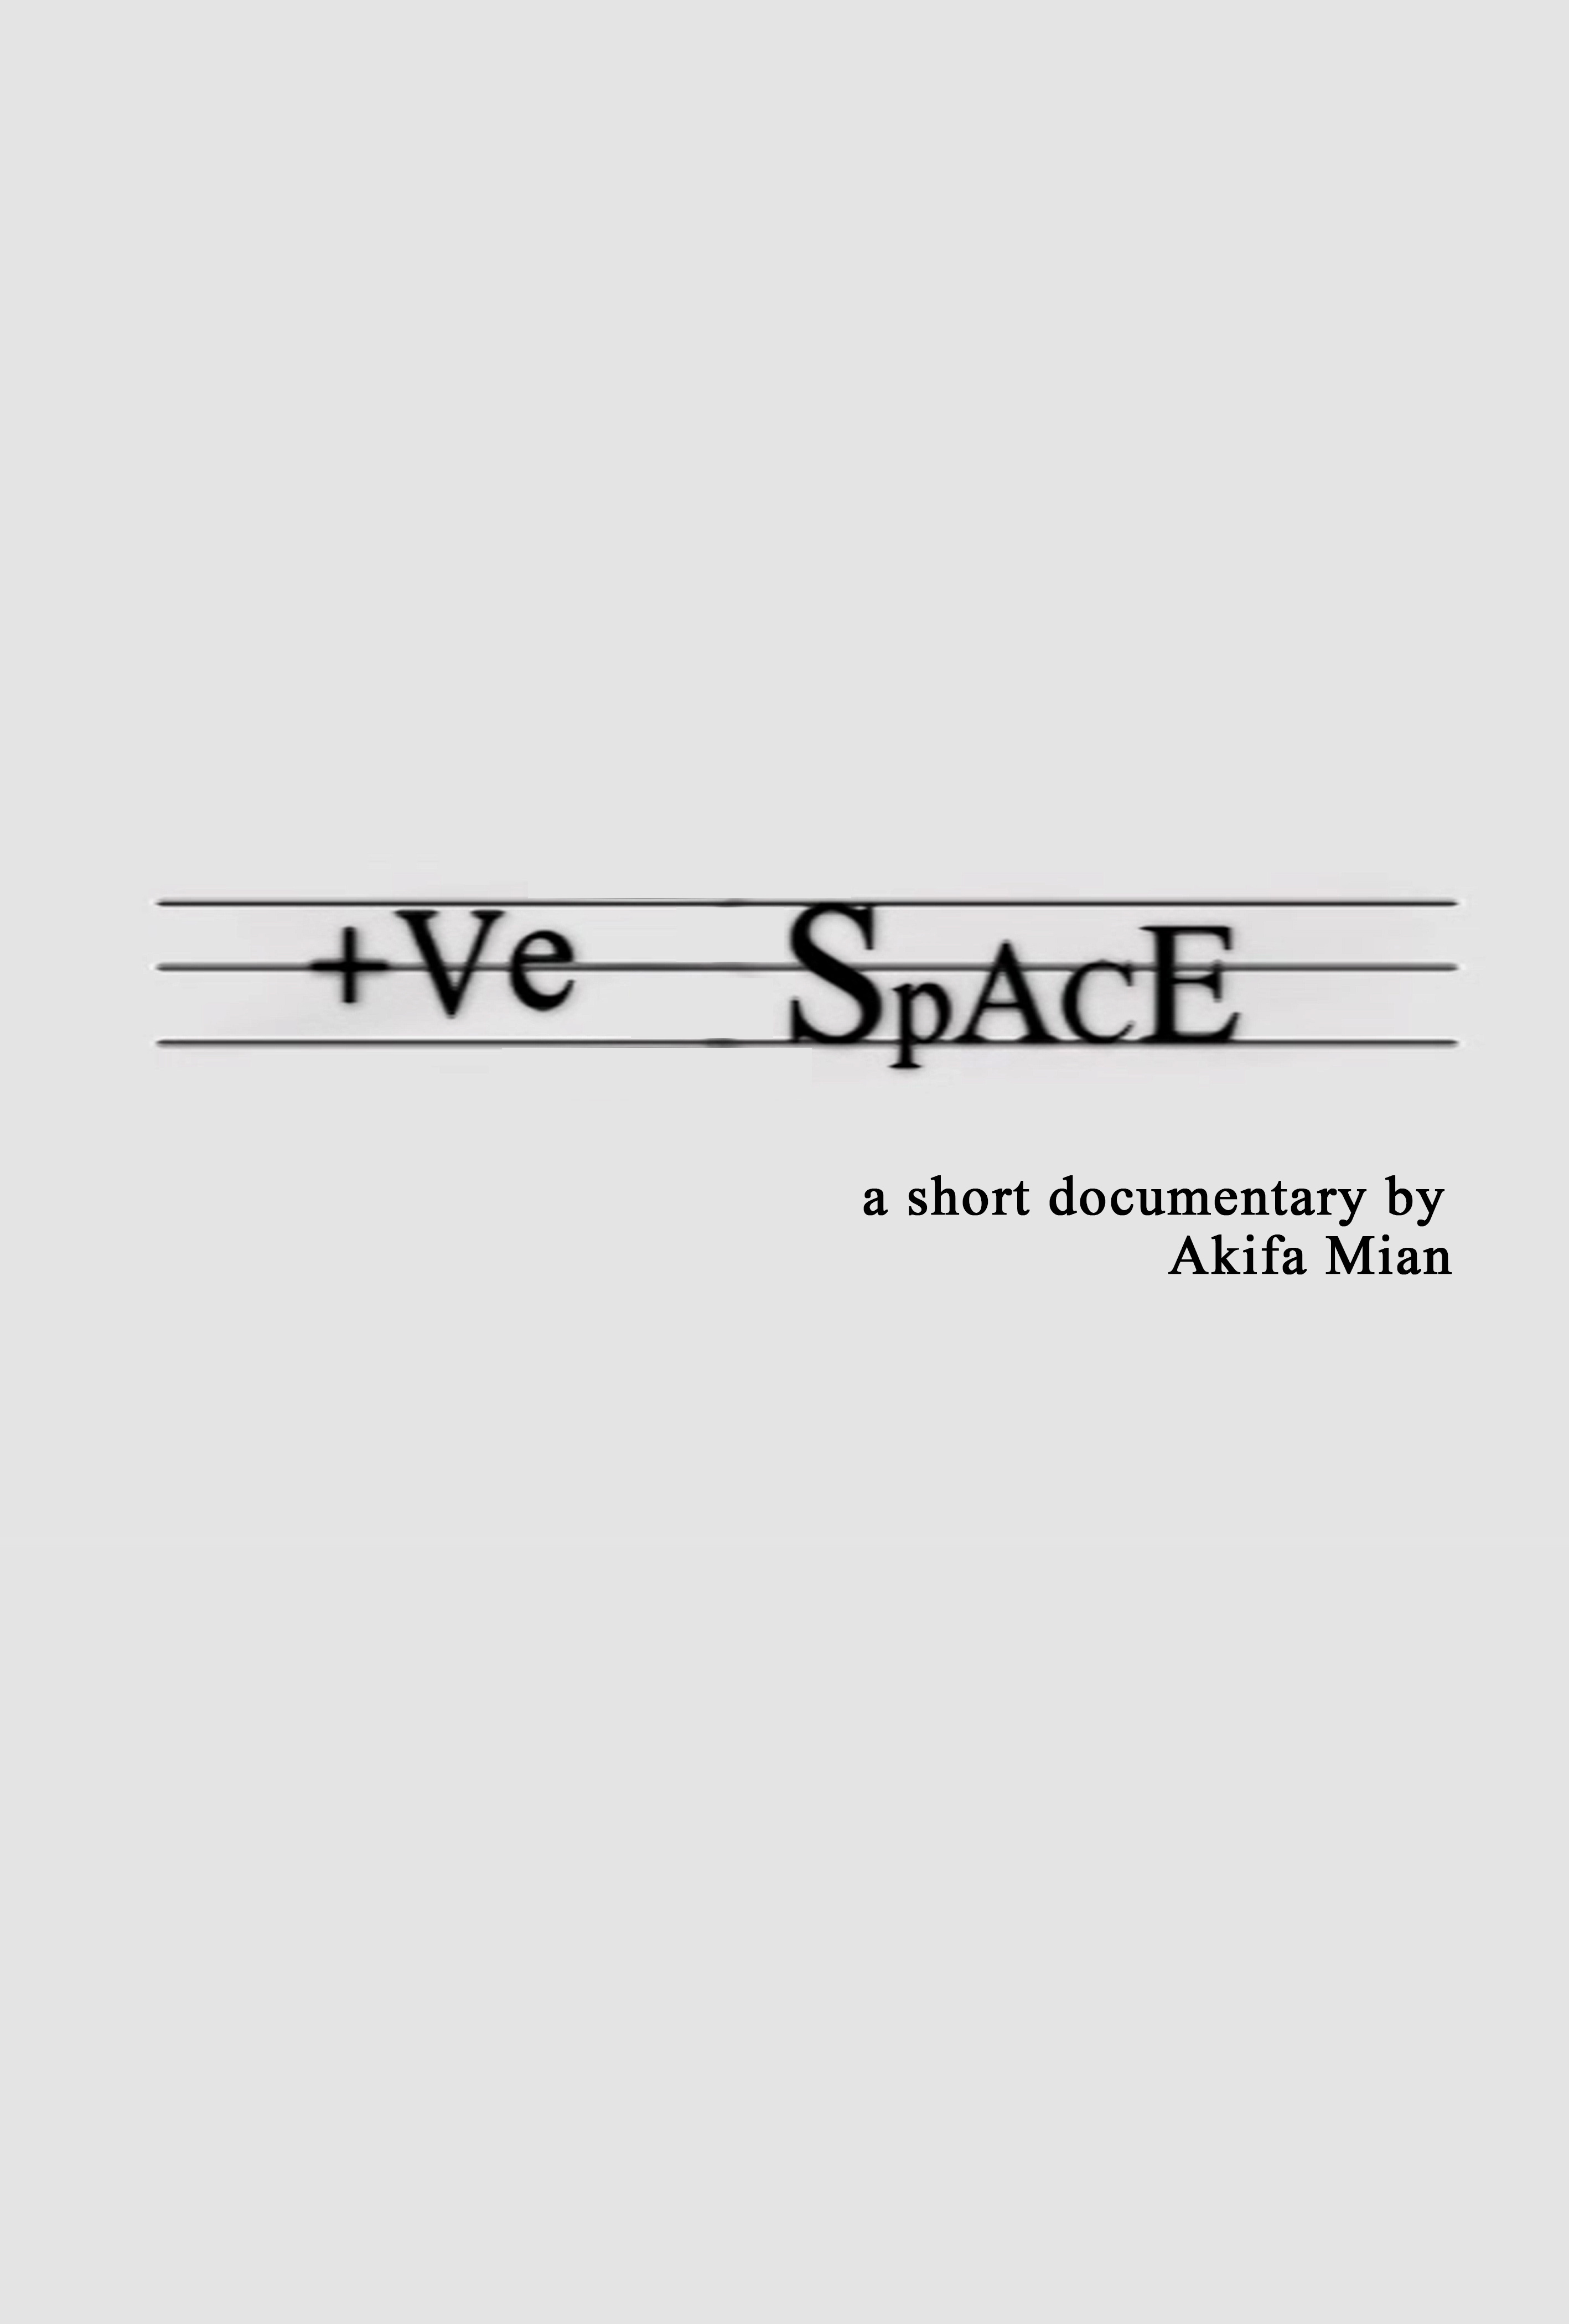 +Ve Space